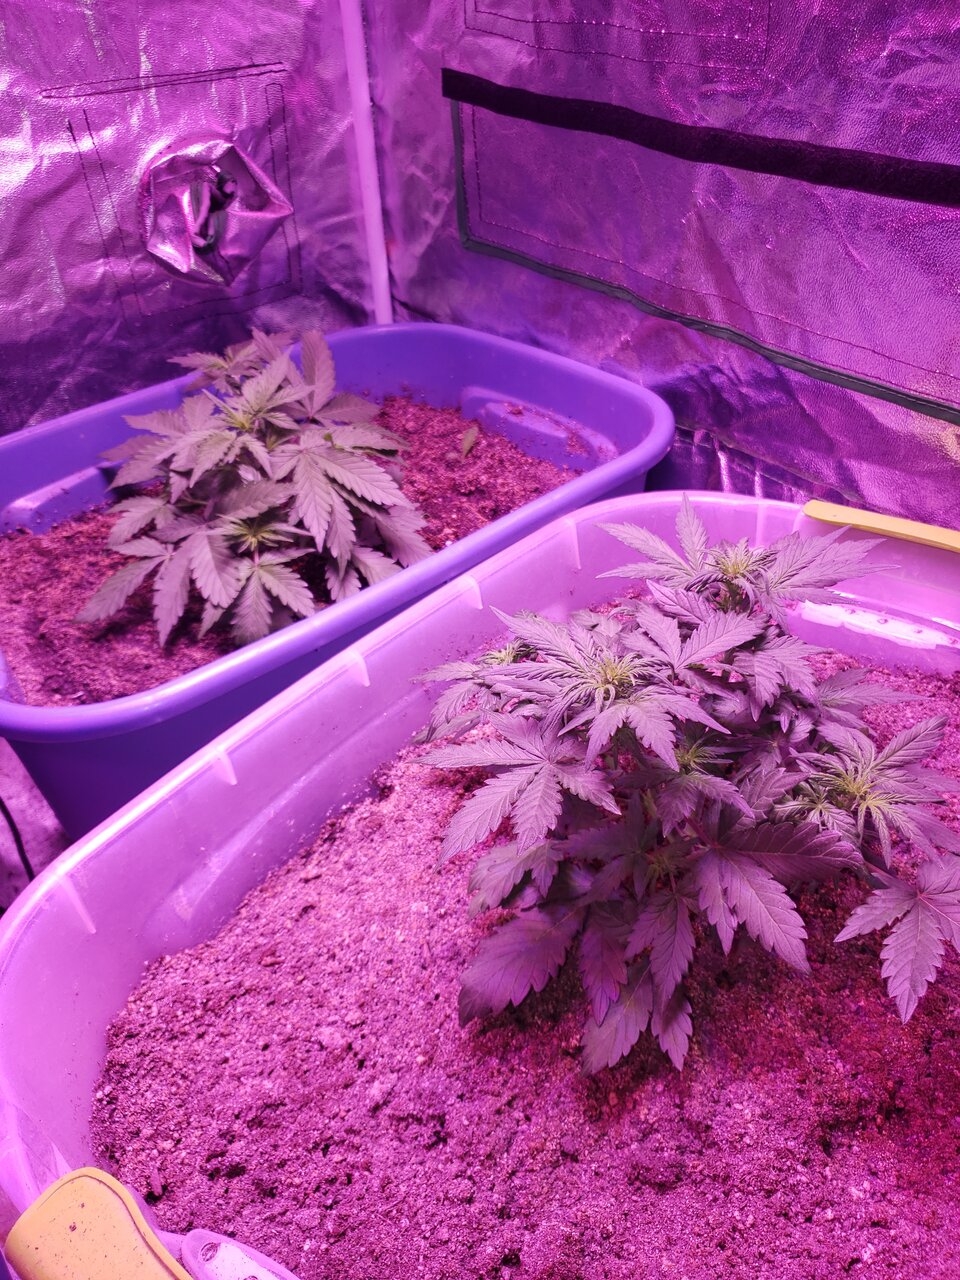 Dual HB autos bottom rite Rhino Ryder-top left is Zkittles